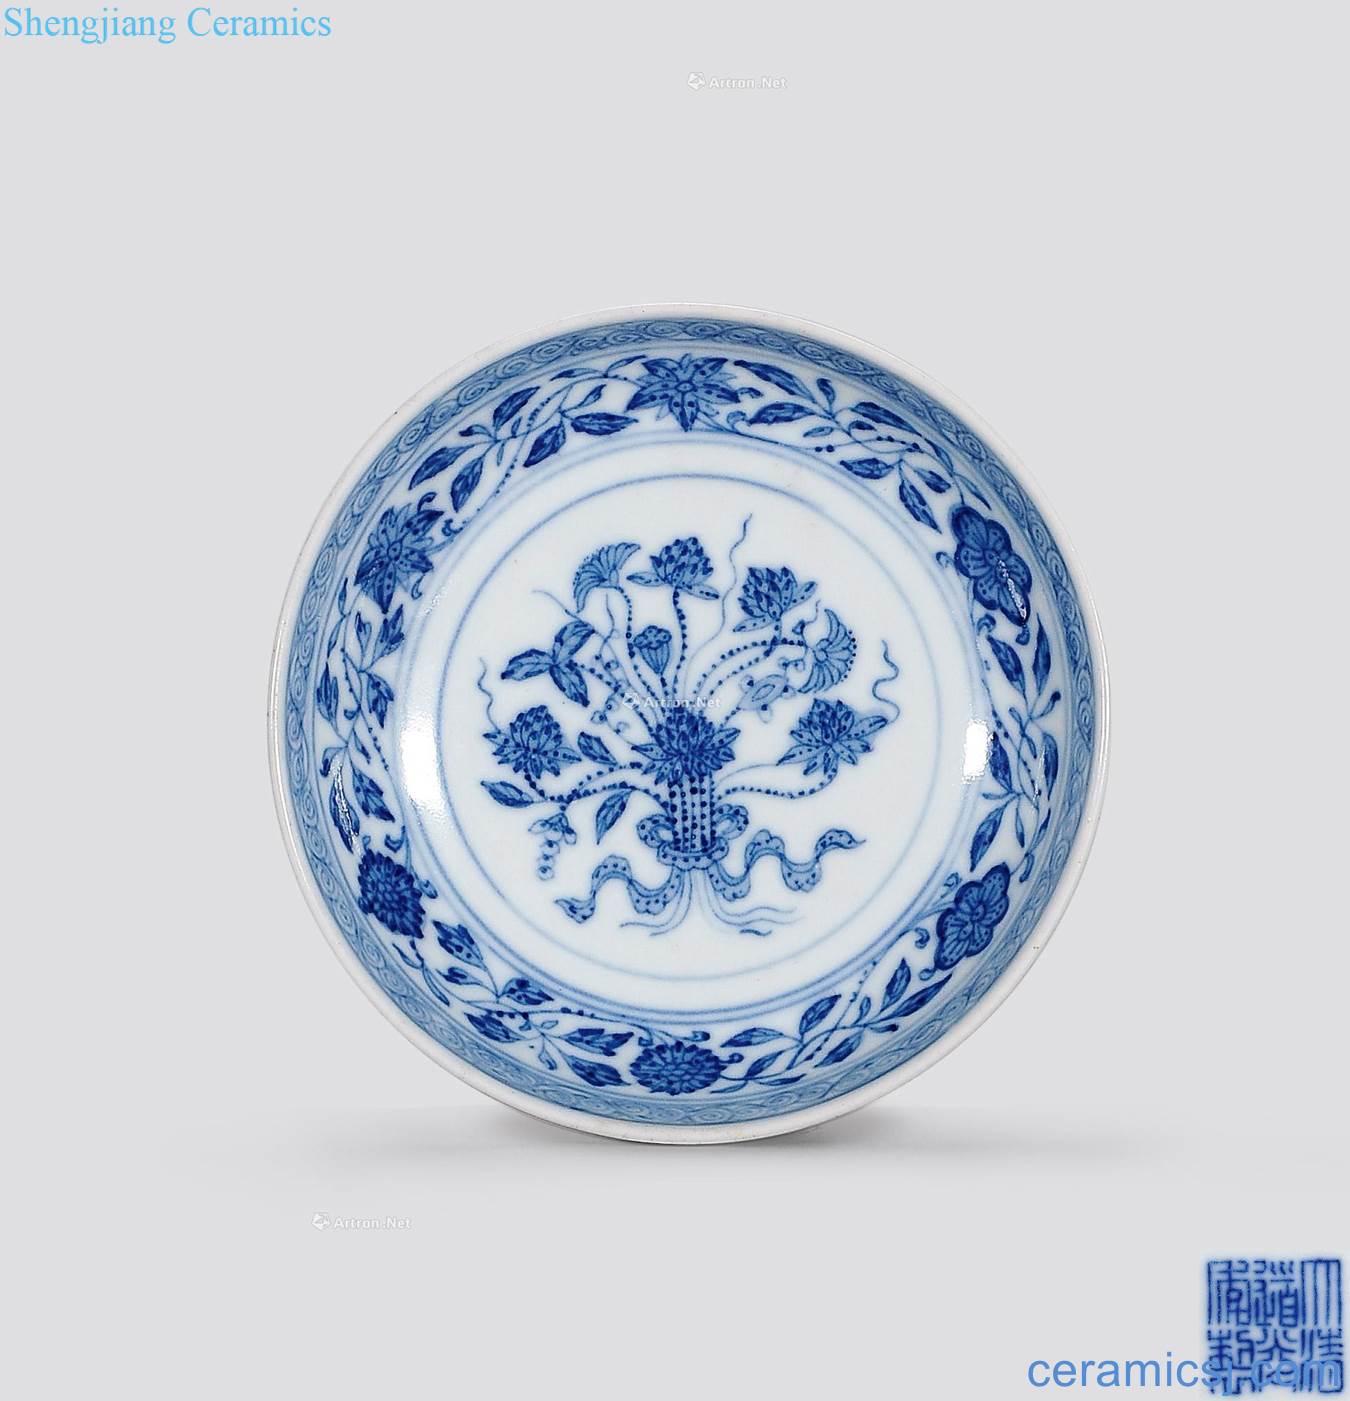 Qing daoguang Blue on a small dish